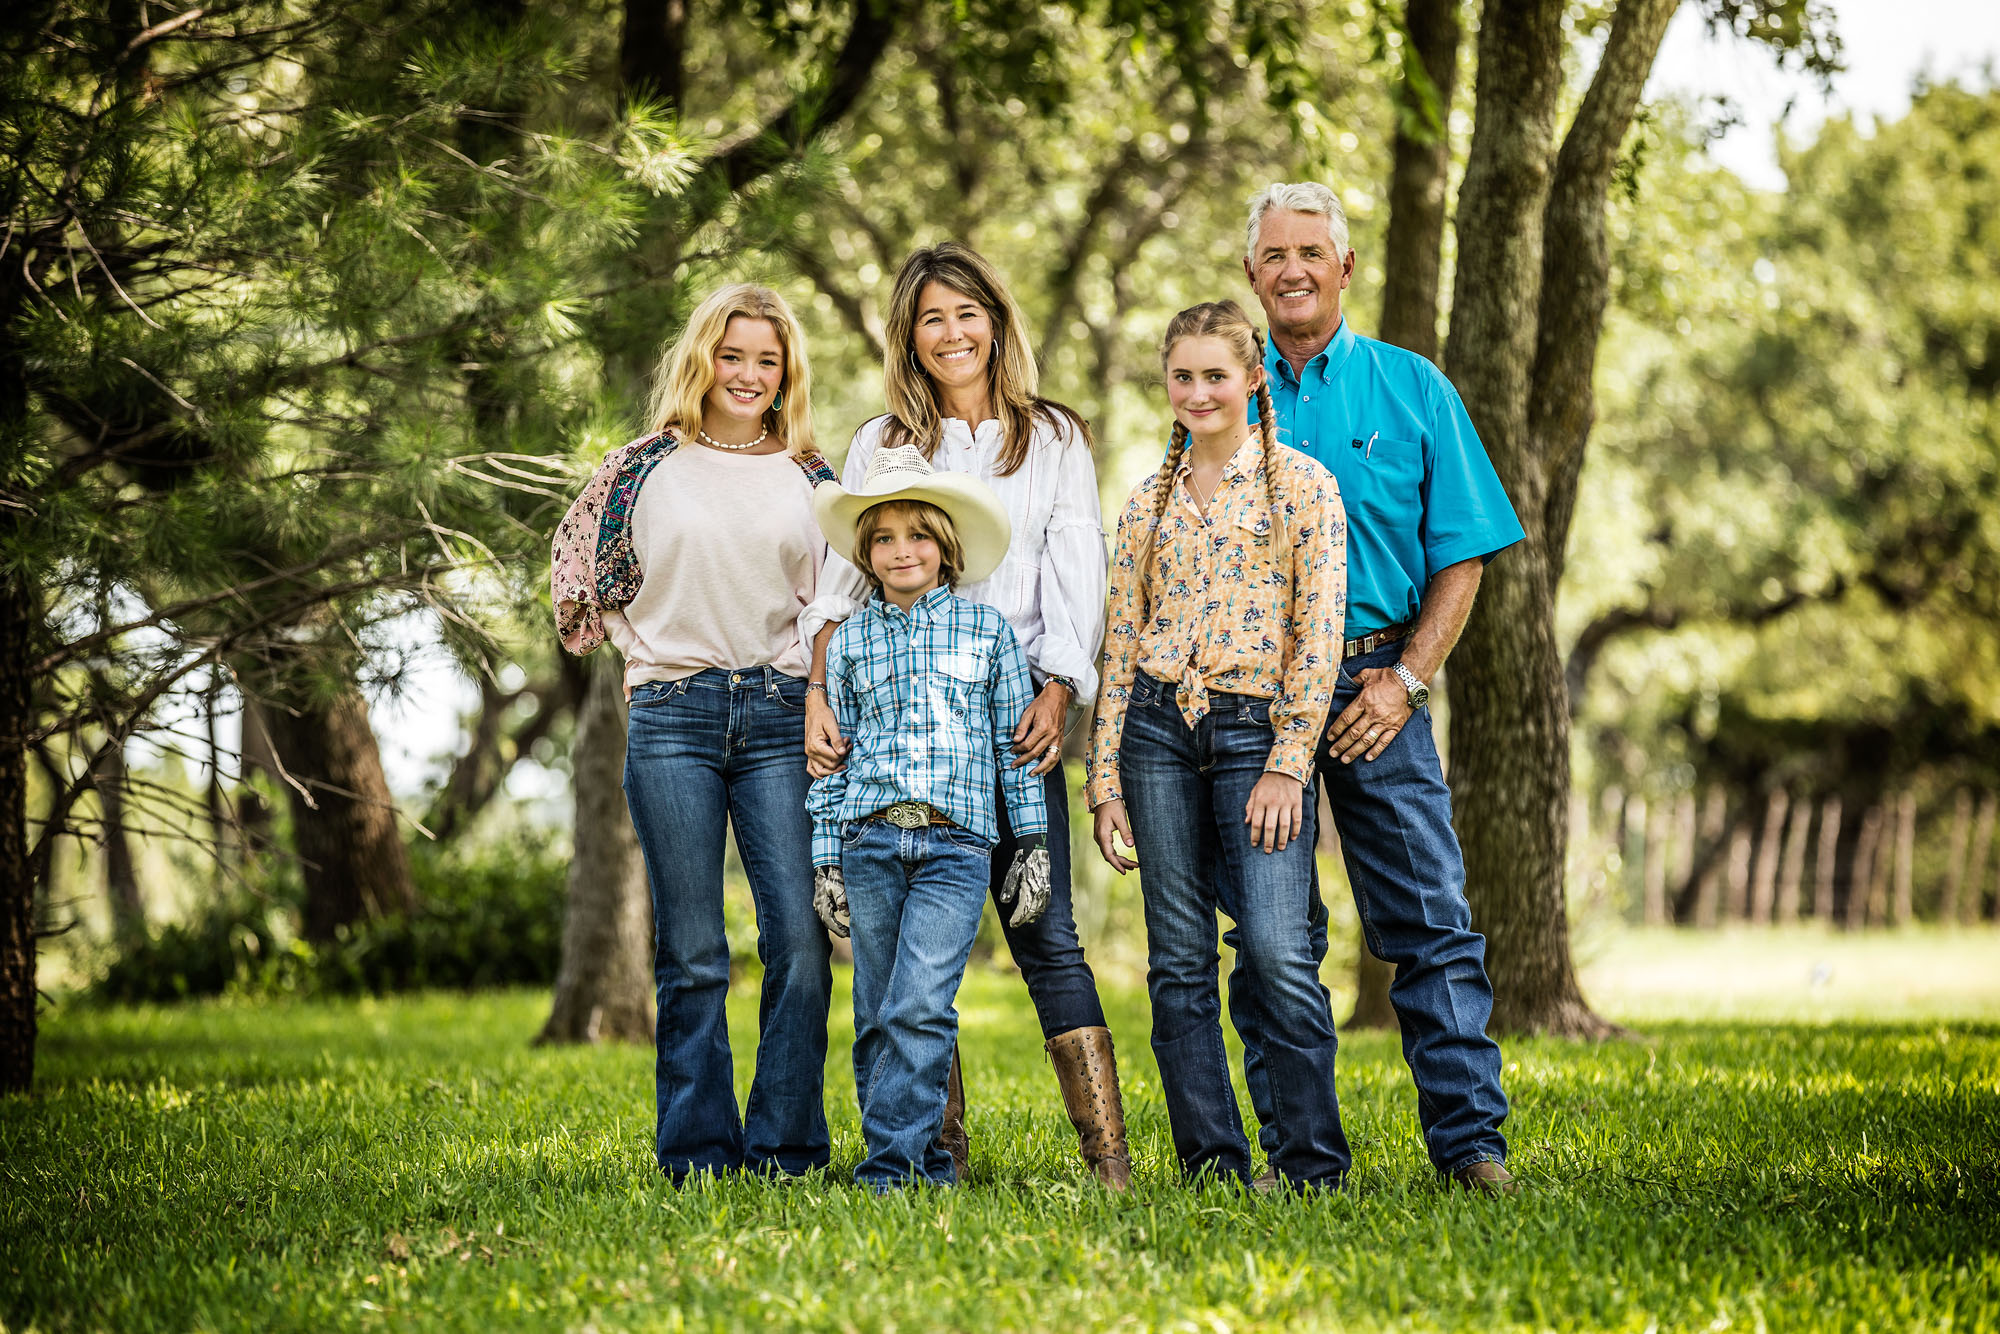 family portrait at ranch in Texas in natural green environment trees